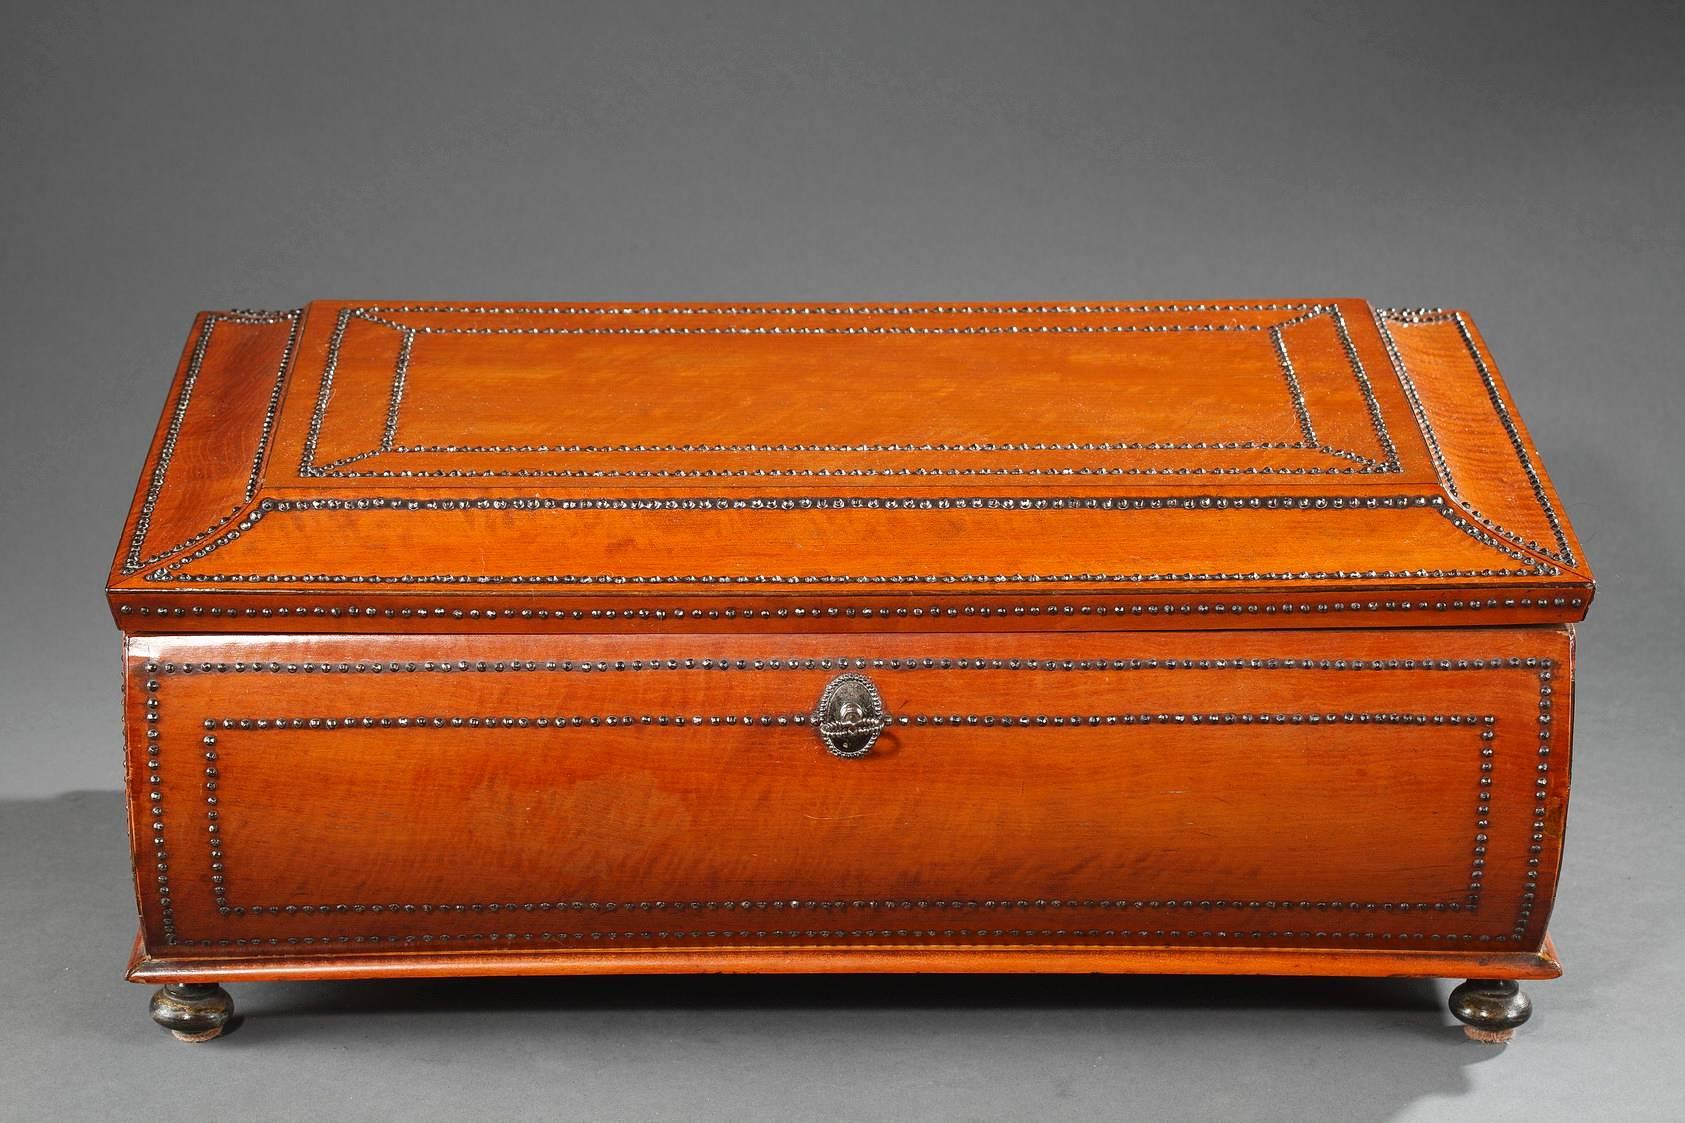 Rectangular box for storing shawls in wood burr veneer. Light ebony stripes and small beads underline the elegant forms of the body and lid. The handles and toupie feet are in iron. The interior is lined with off-white silk, and inside of the lid is